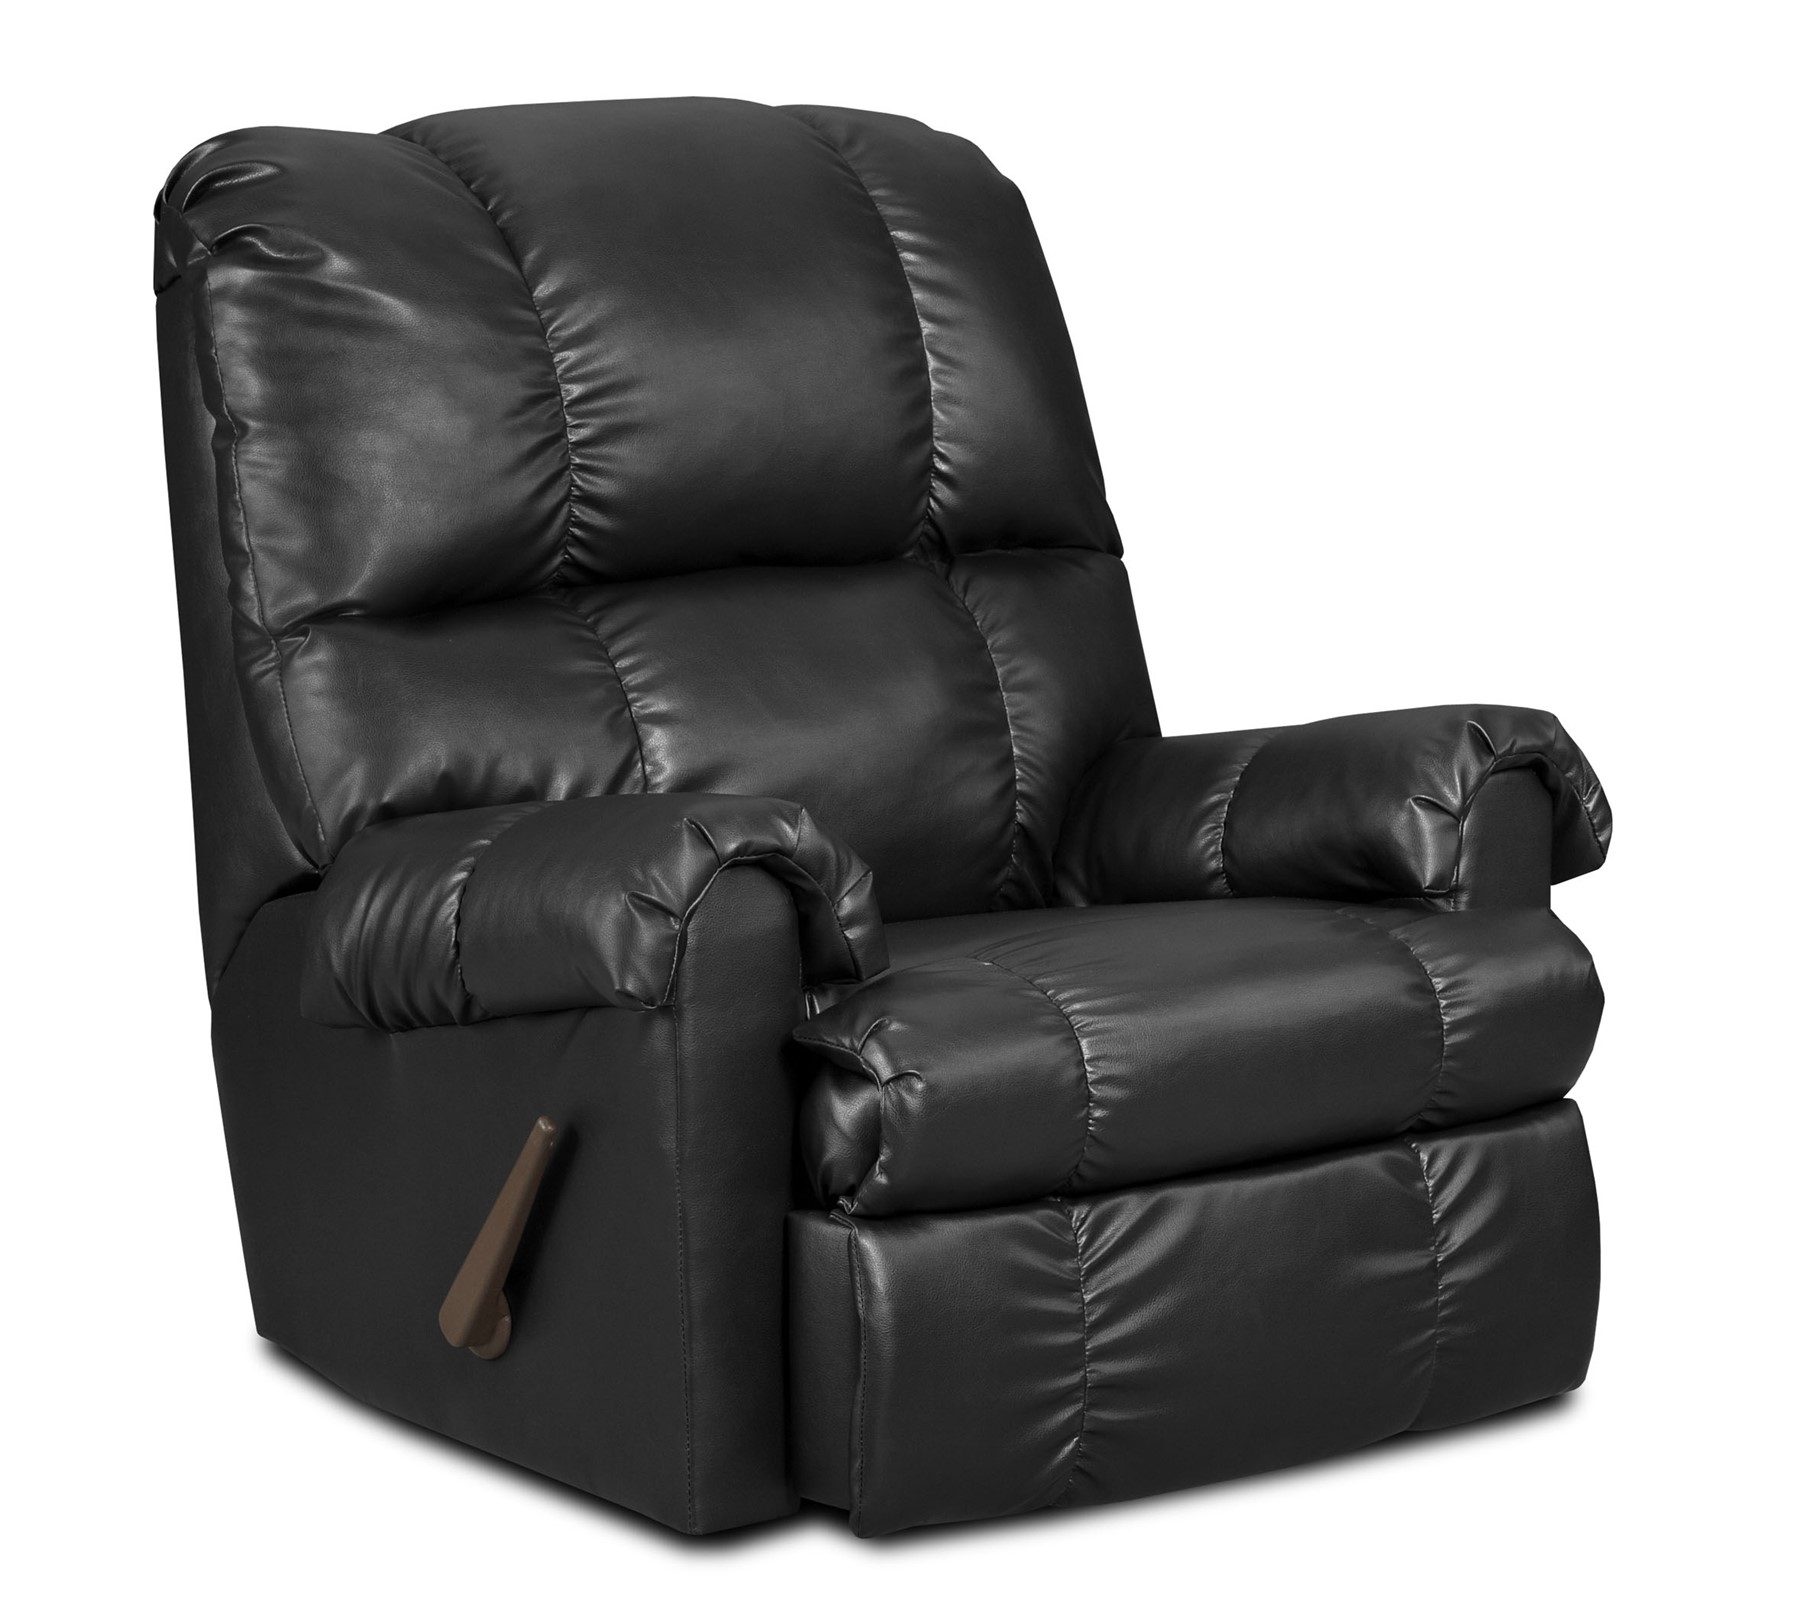 100-06 Cowgirl Black Recliner - Click Image to Close